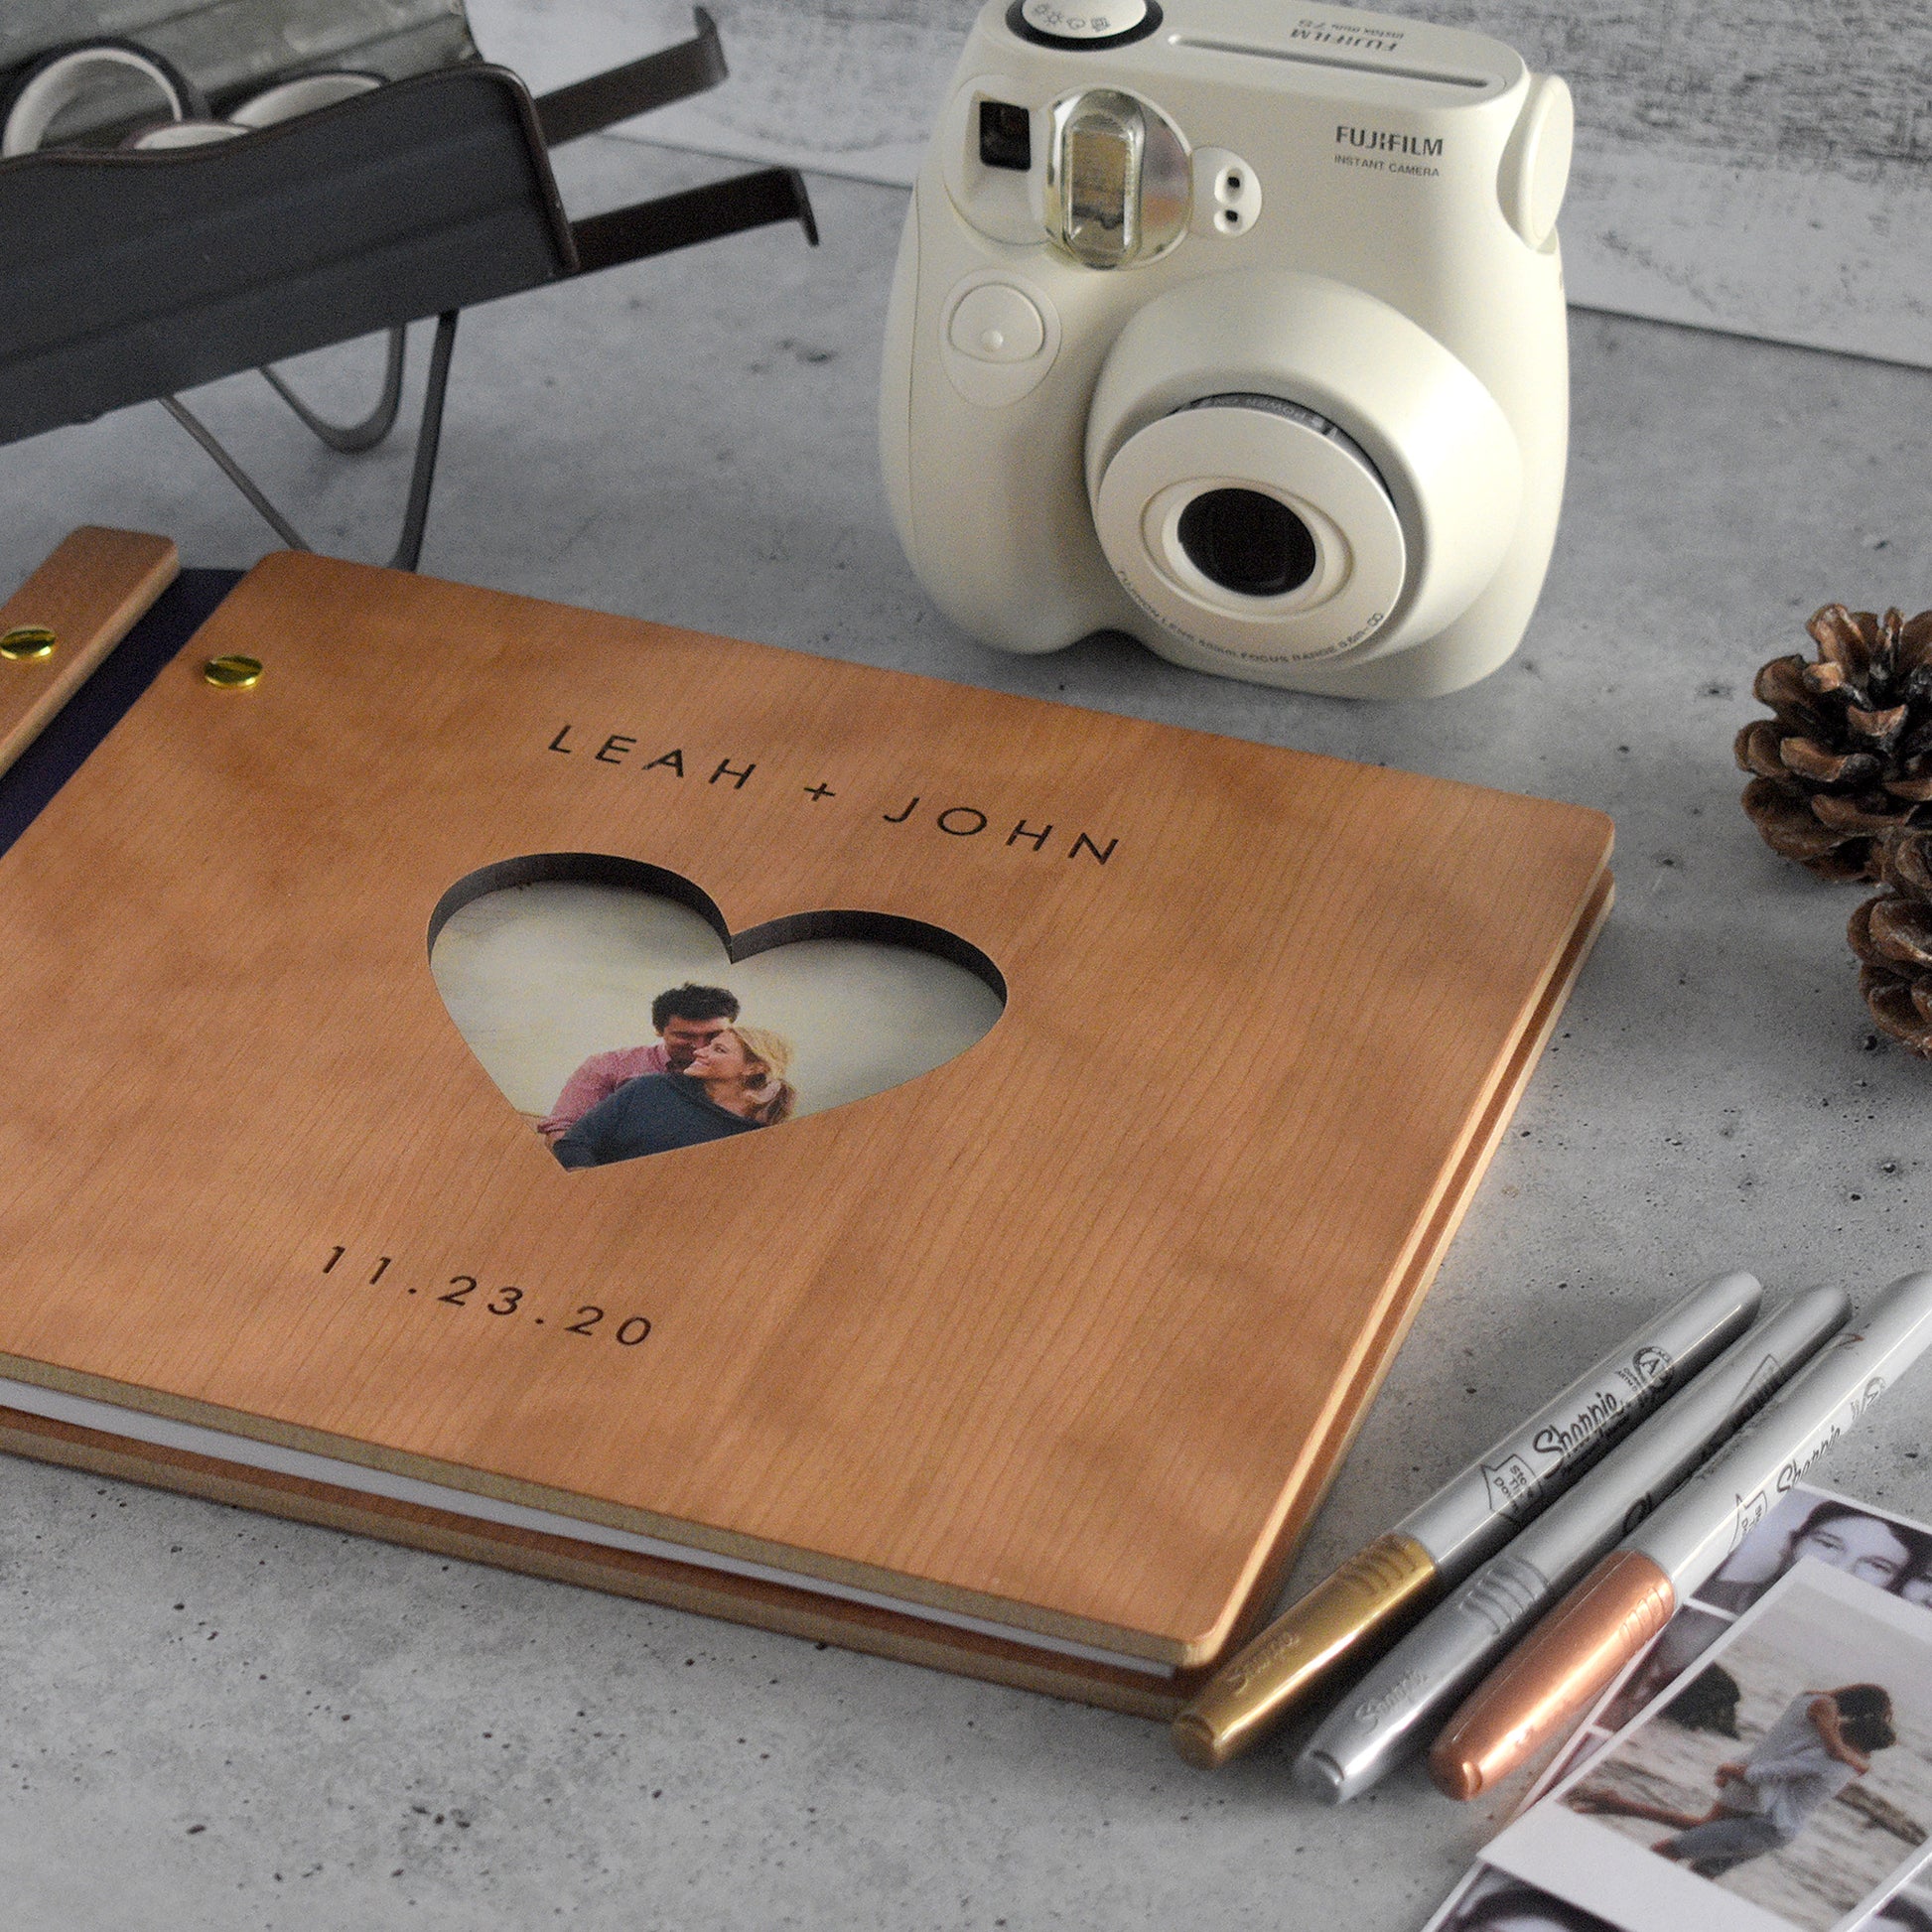 An 8.5x11" guest book lies on a table. Made of cherry wood, purple vegan leather binding, and gold hardware. The front cover reads “Leah + John, 11.23.20"